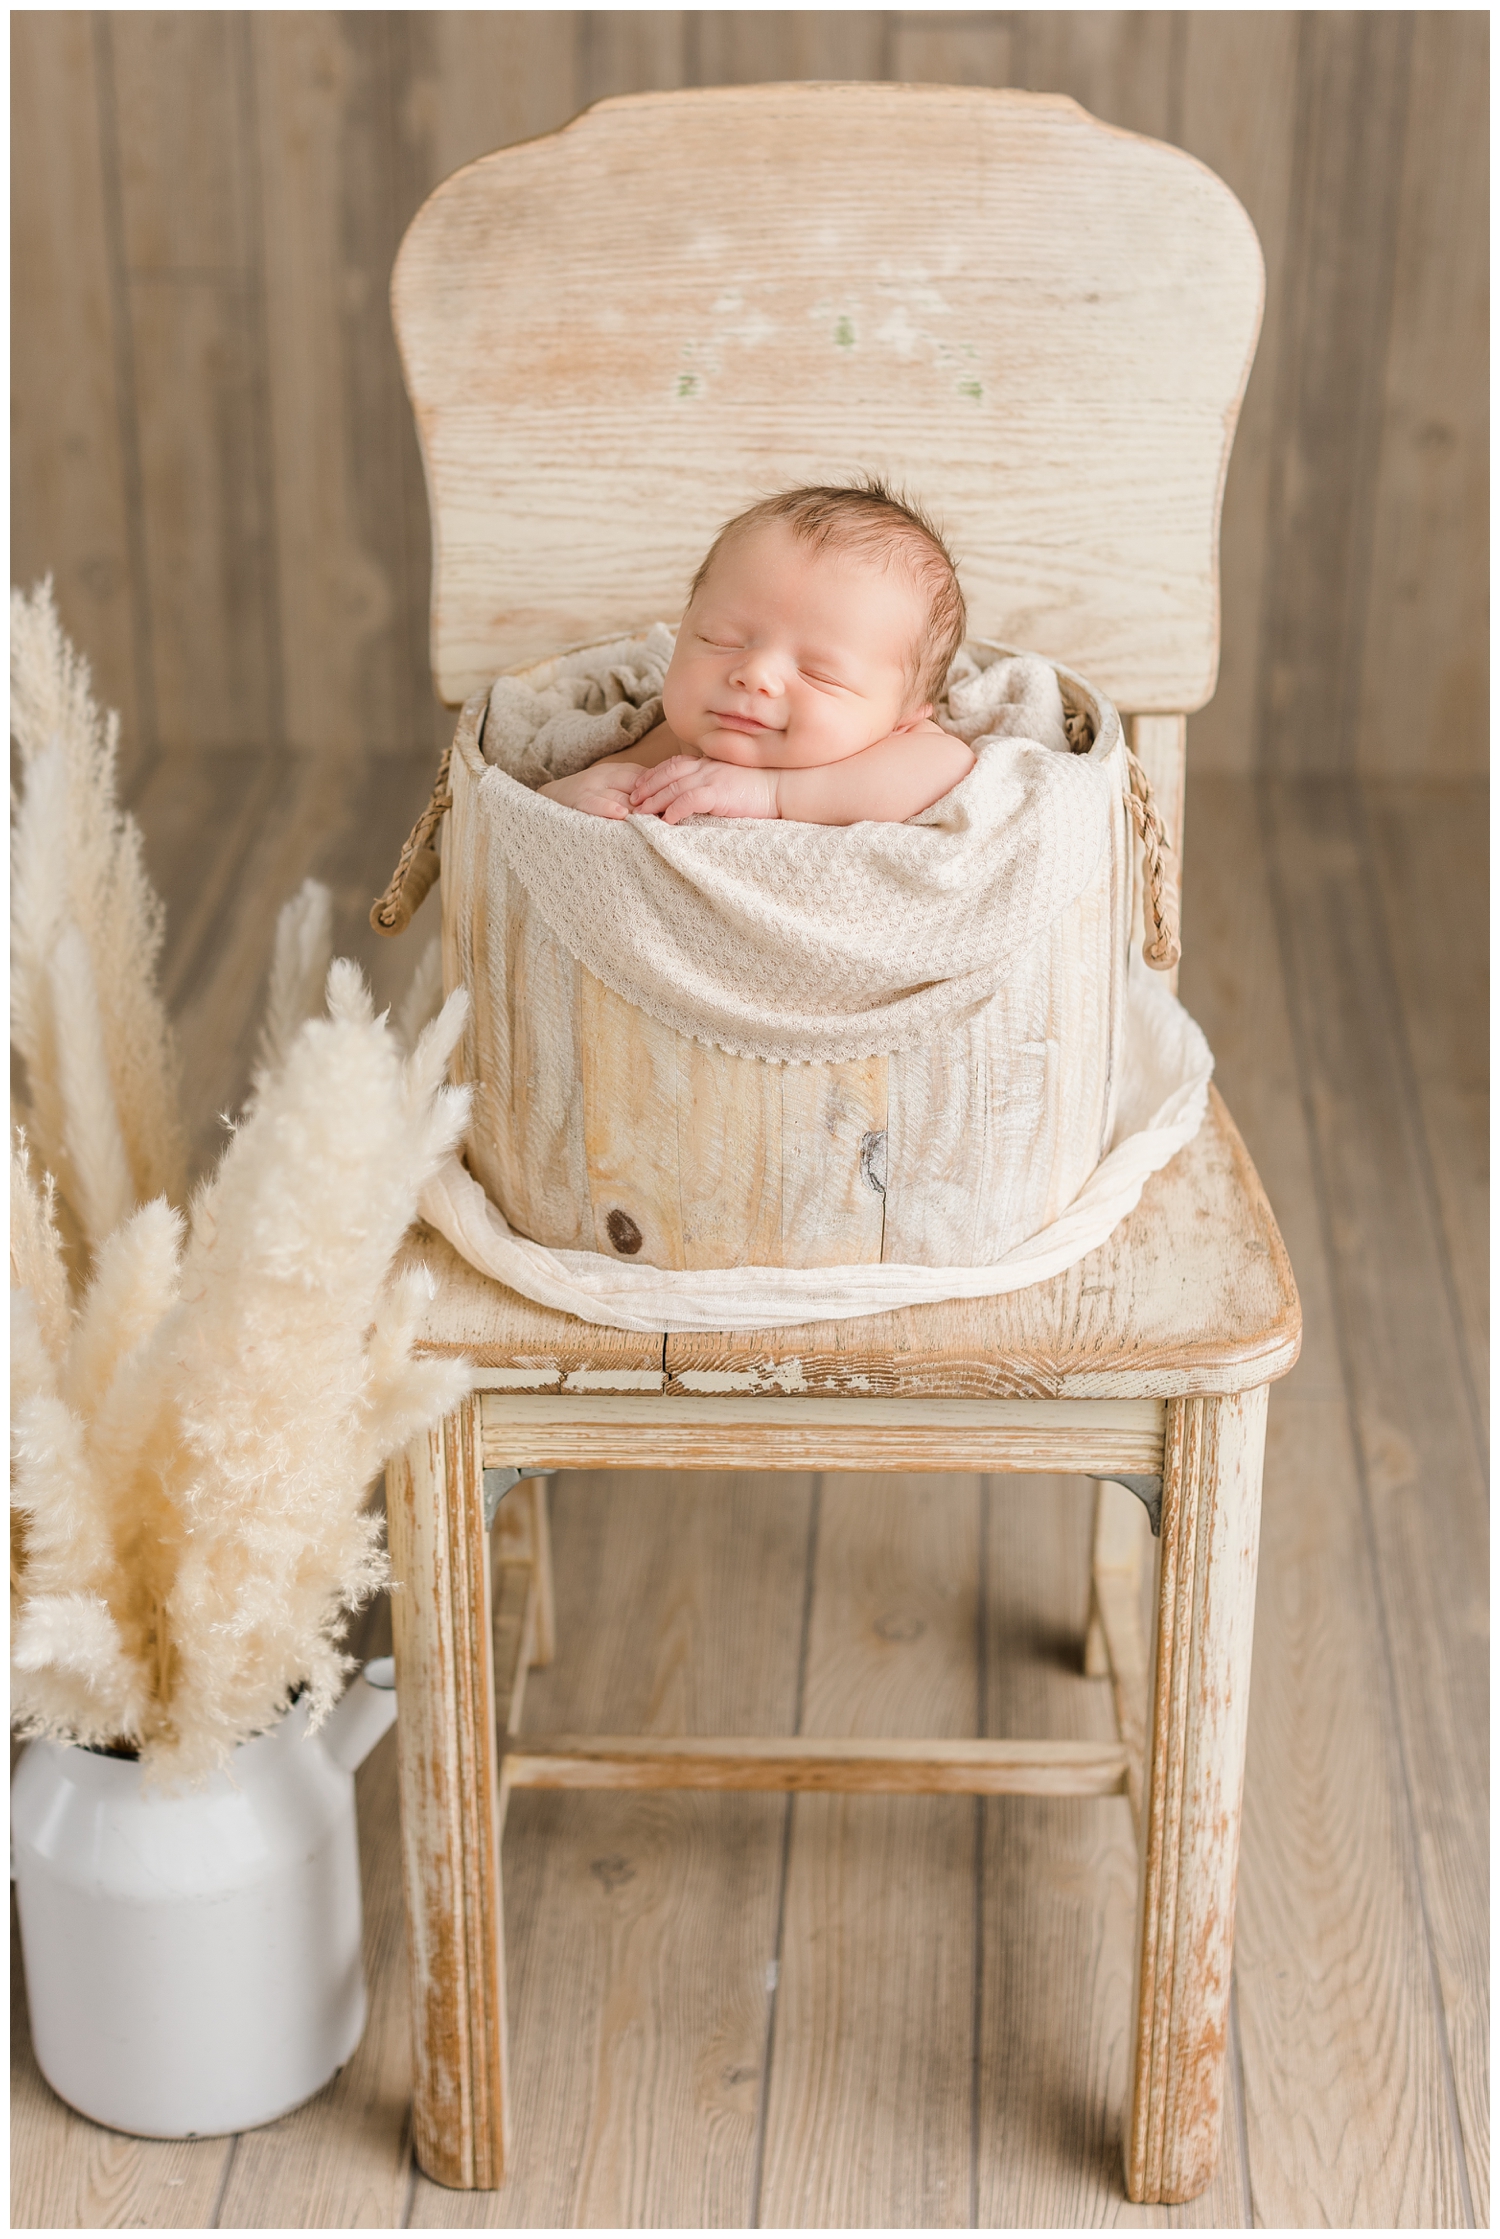 Baby Rhett smiling while nestled in a cream wood bucket on a cream wooden chair with a kettle of pampas grass in a boho theme setup | CB Studio